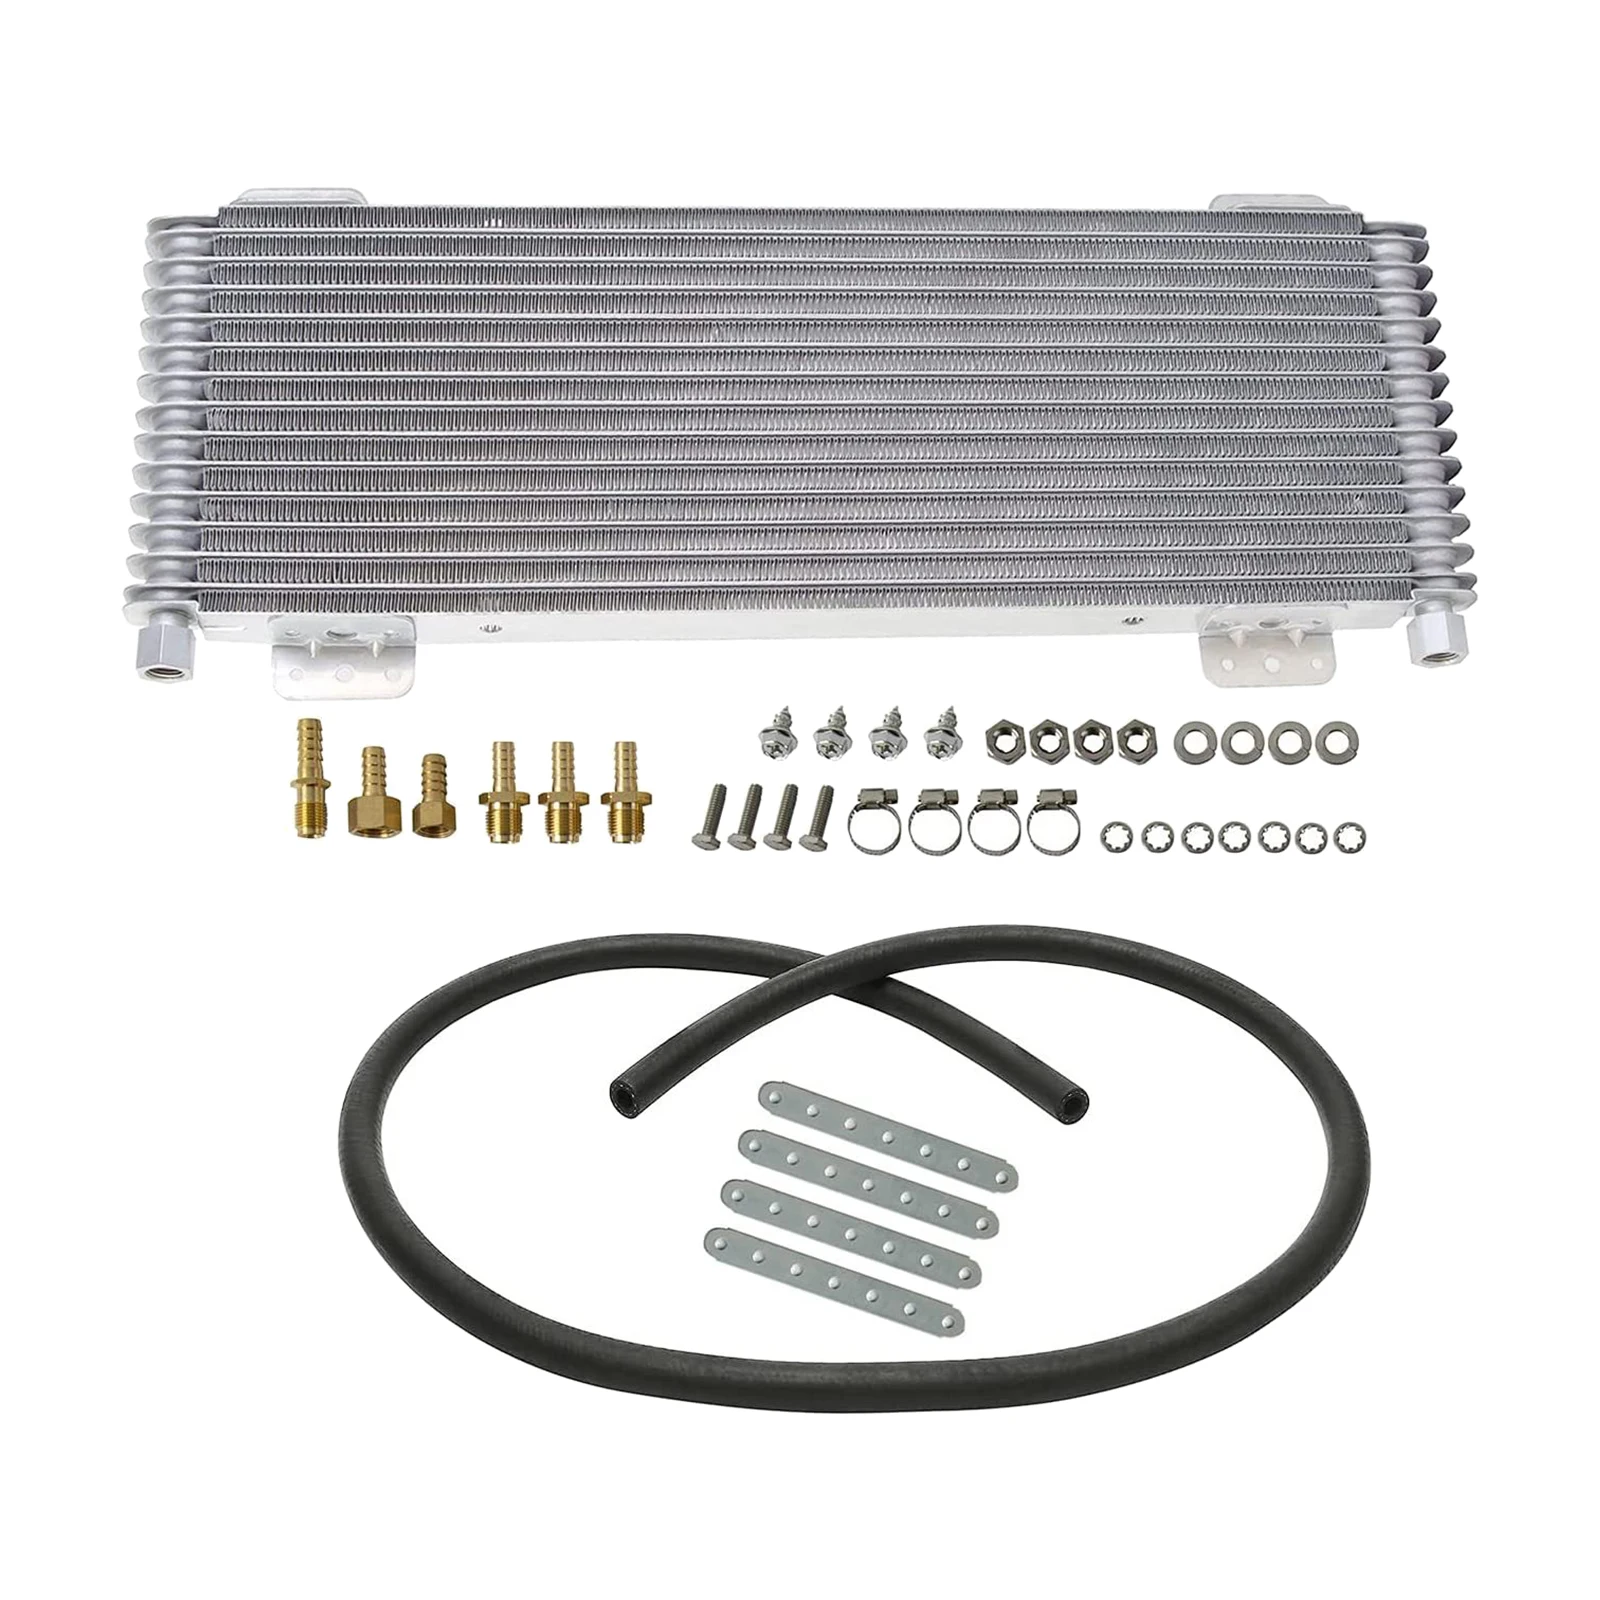 WonVon Low Pressure Drop Transmission Oil Cooler Transmission Cooler for 40000 GVW with Mounting Hardware and Cooling Protection and Towing LPD47391 